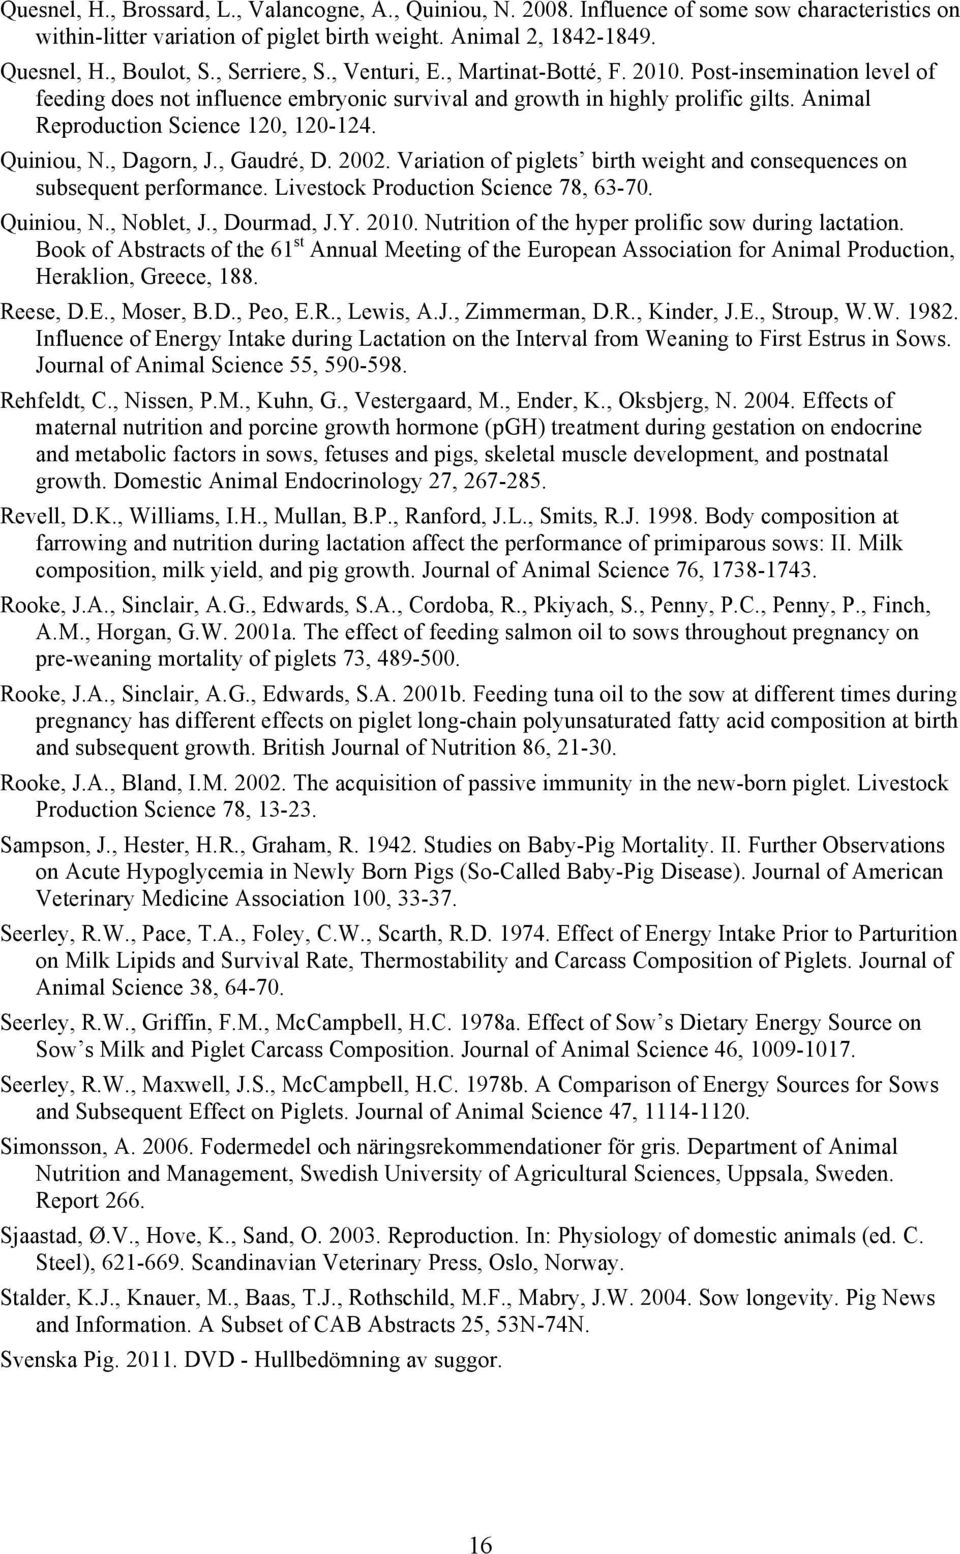 Animal Reproduction Science 120, 120-124. Quiniou, N., Dagorn, J., Gaudré, D. 2002. Variation of piglets birth weight and consequences on subsequent performance.